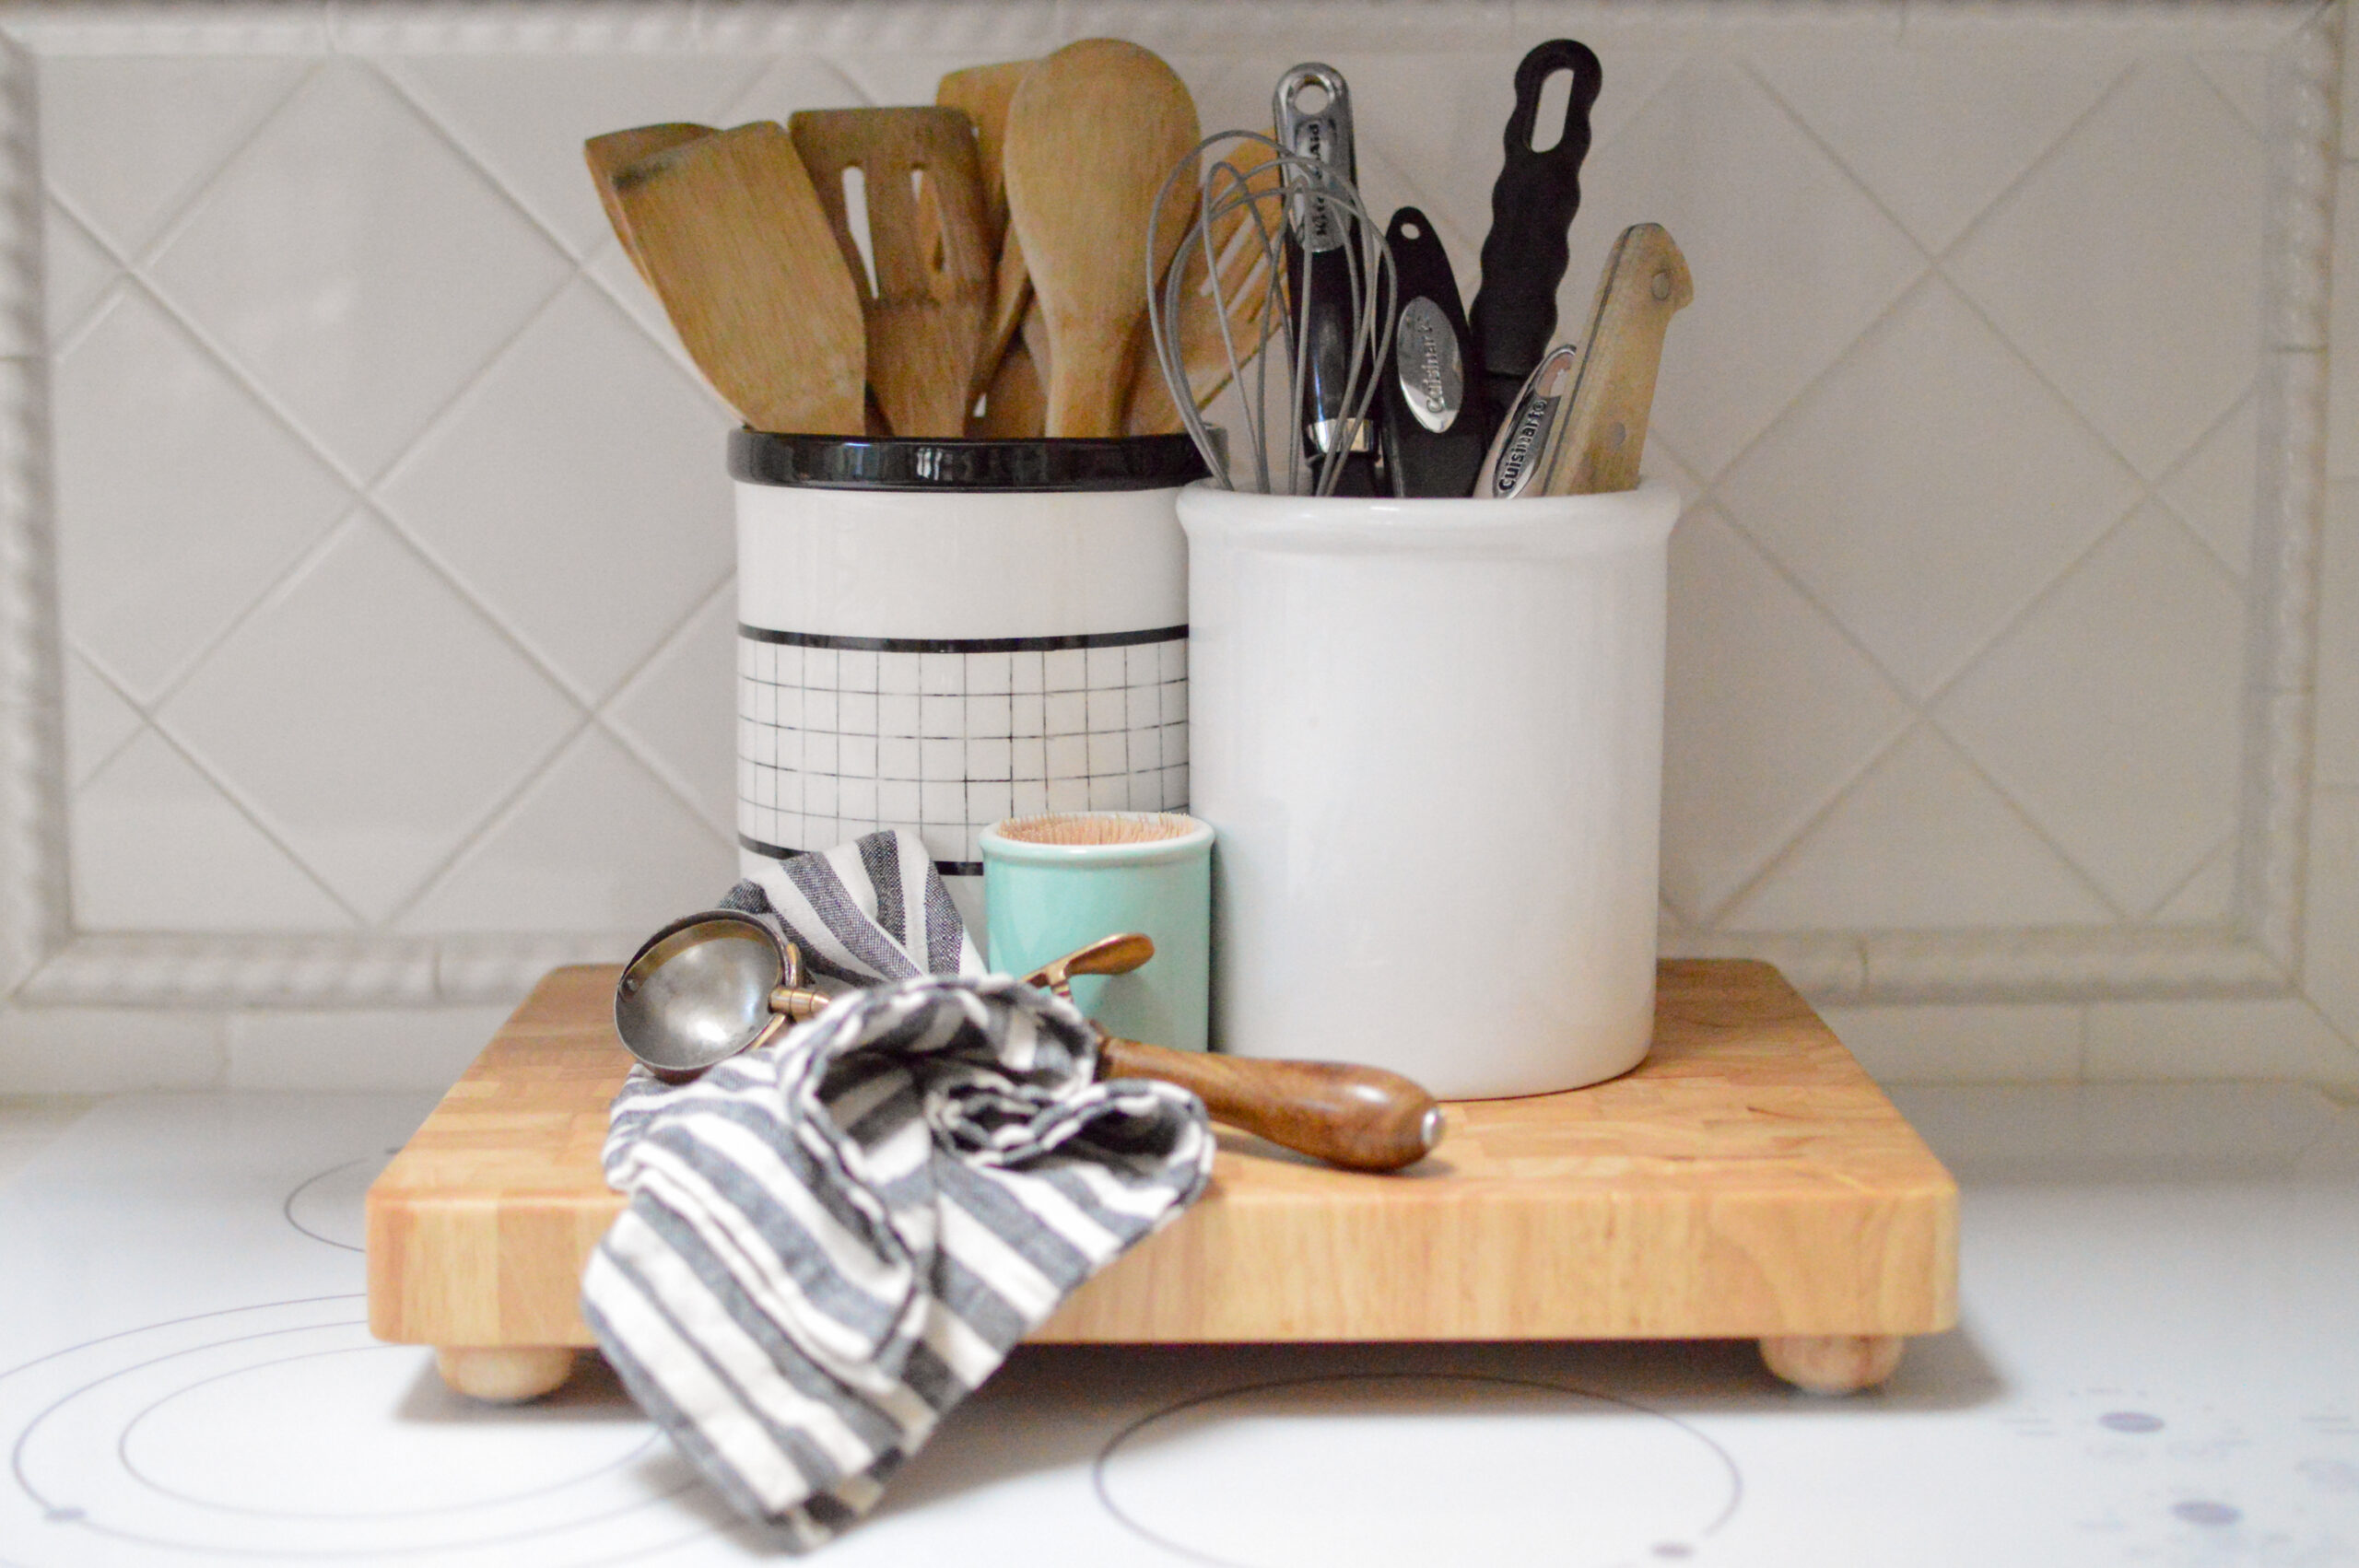 https://foxhollowcottage.com/wp-content/uploads/2021/01/Organizied-Utencil-Storage-Ideas-Month-long-weekly-Cleaning-Organizing-event-with-Free-Printable-checklist-www.foxhollowcottage.com_-scaled.jpg